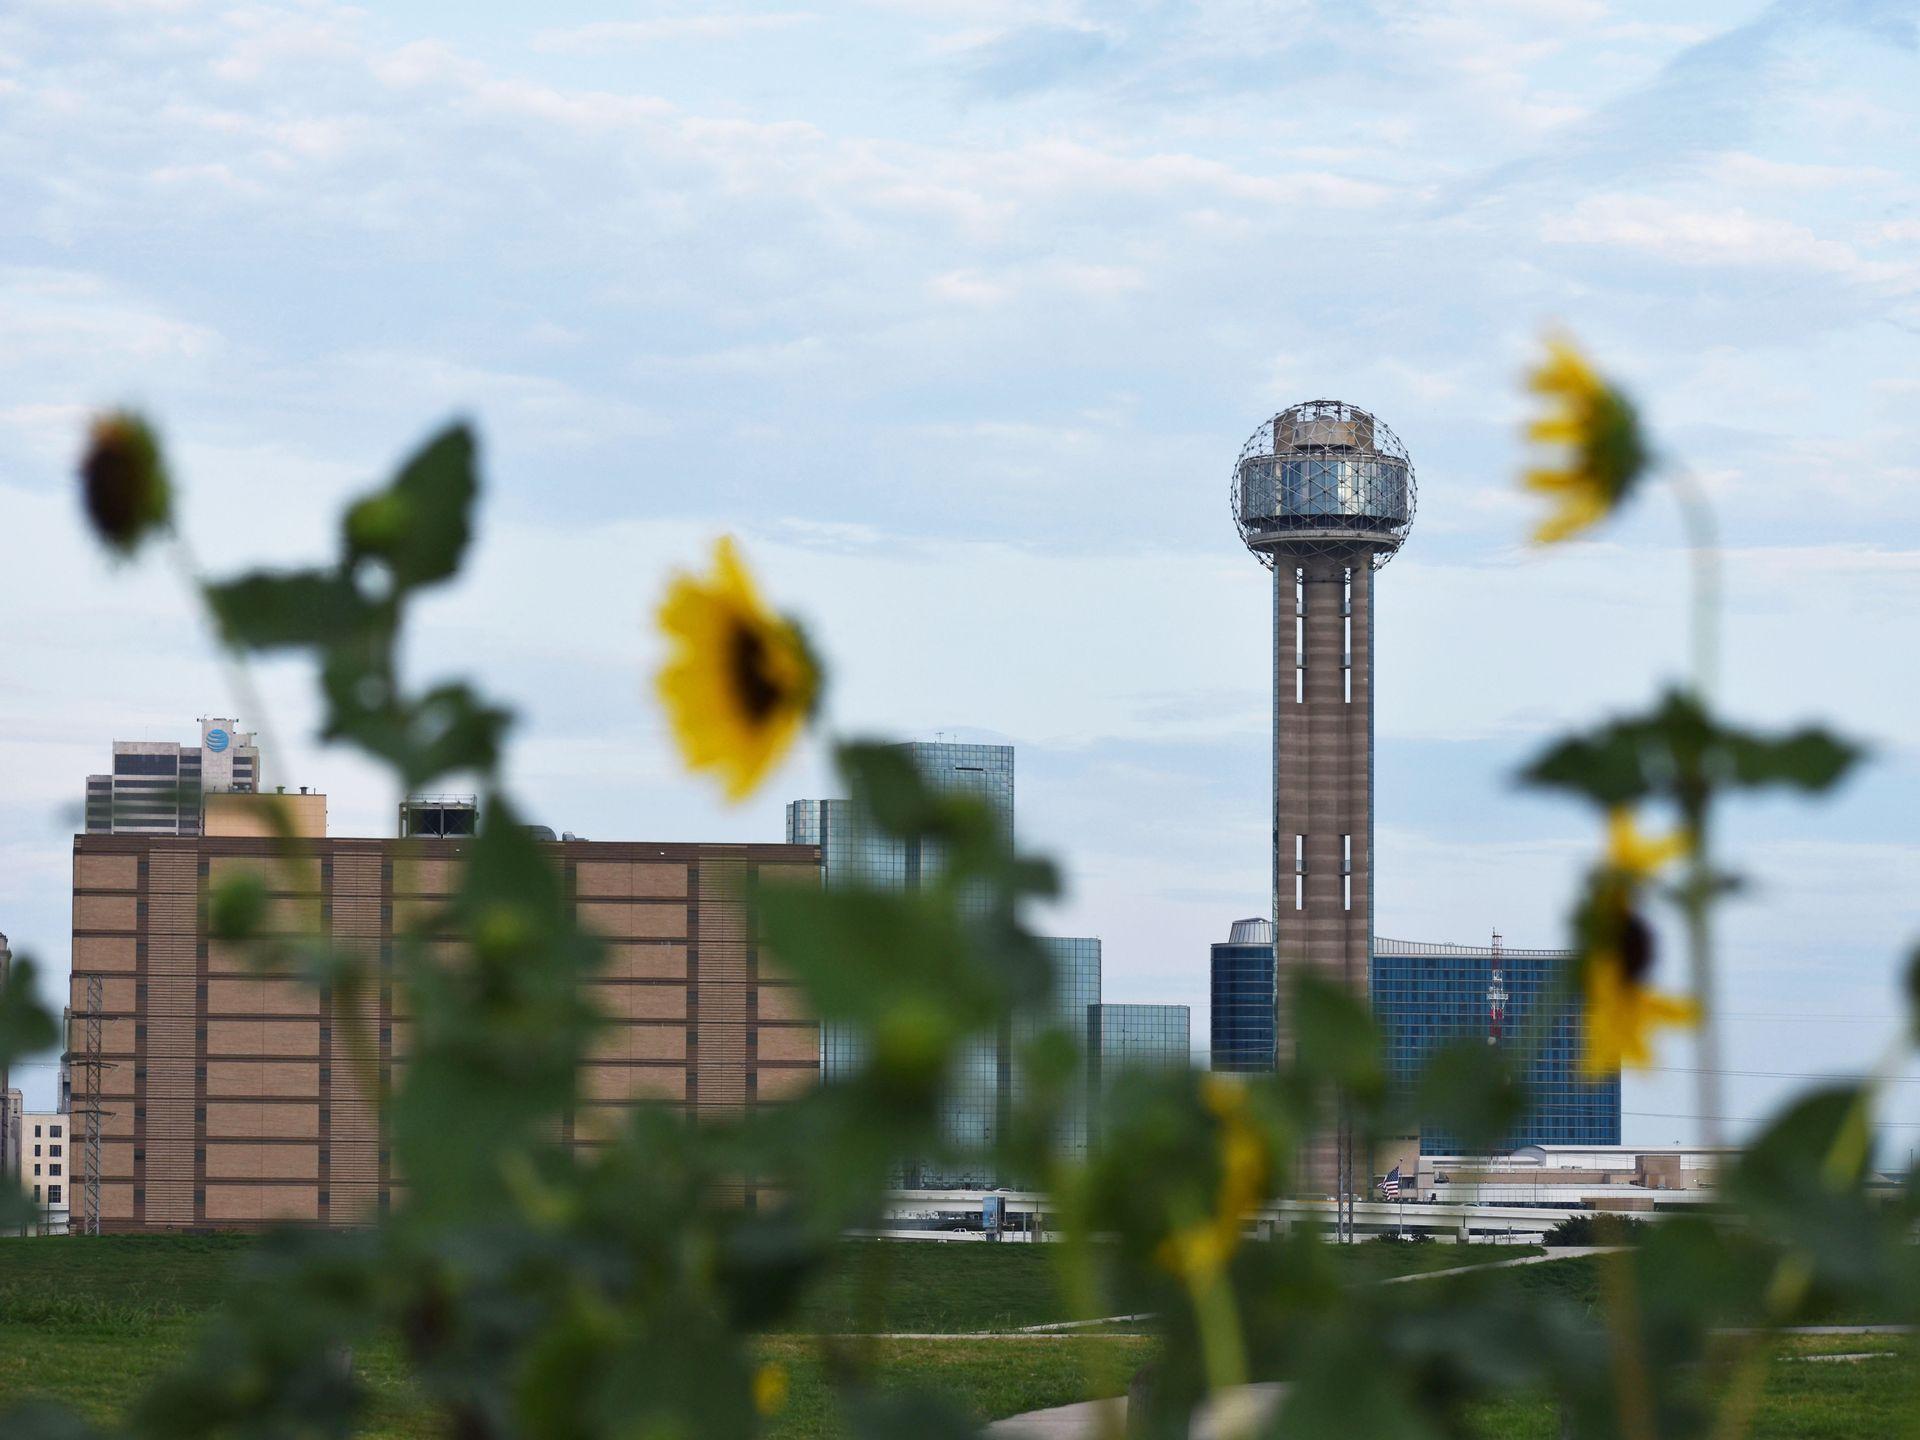 A view of Reunion Tower with some blurred sunflowers in the foreground.